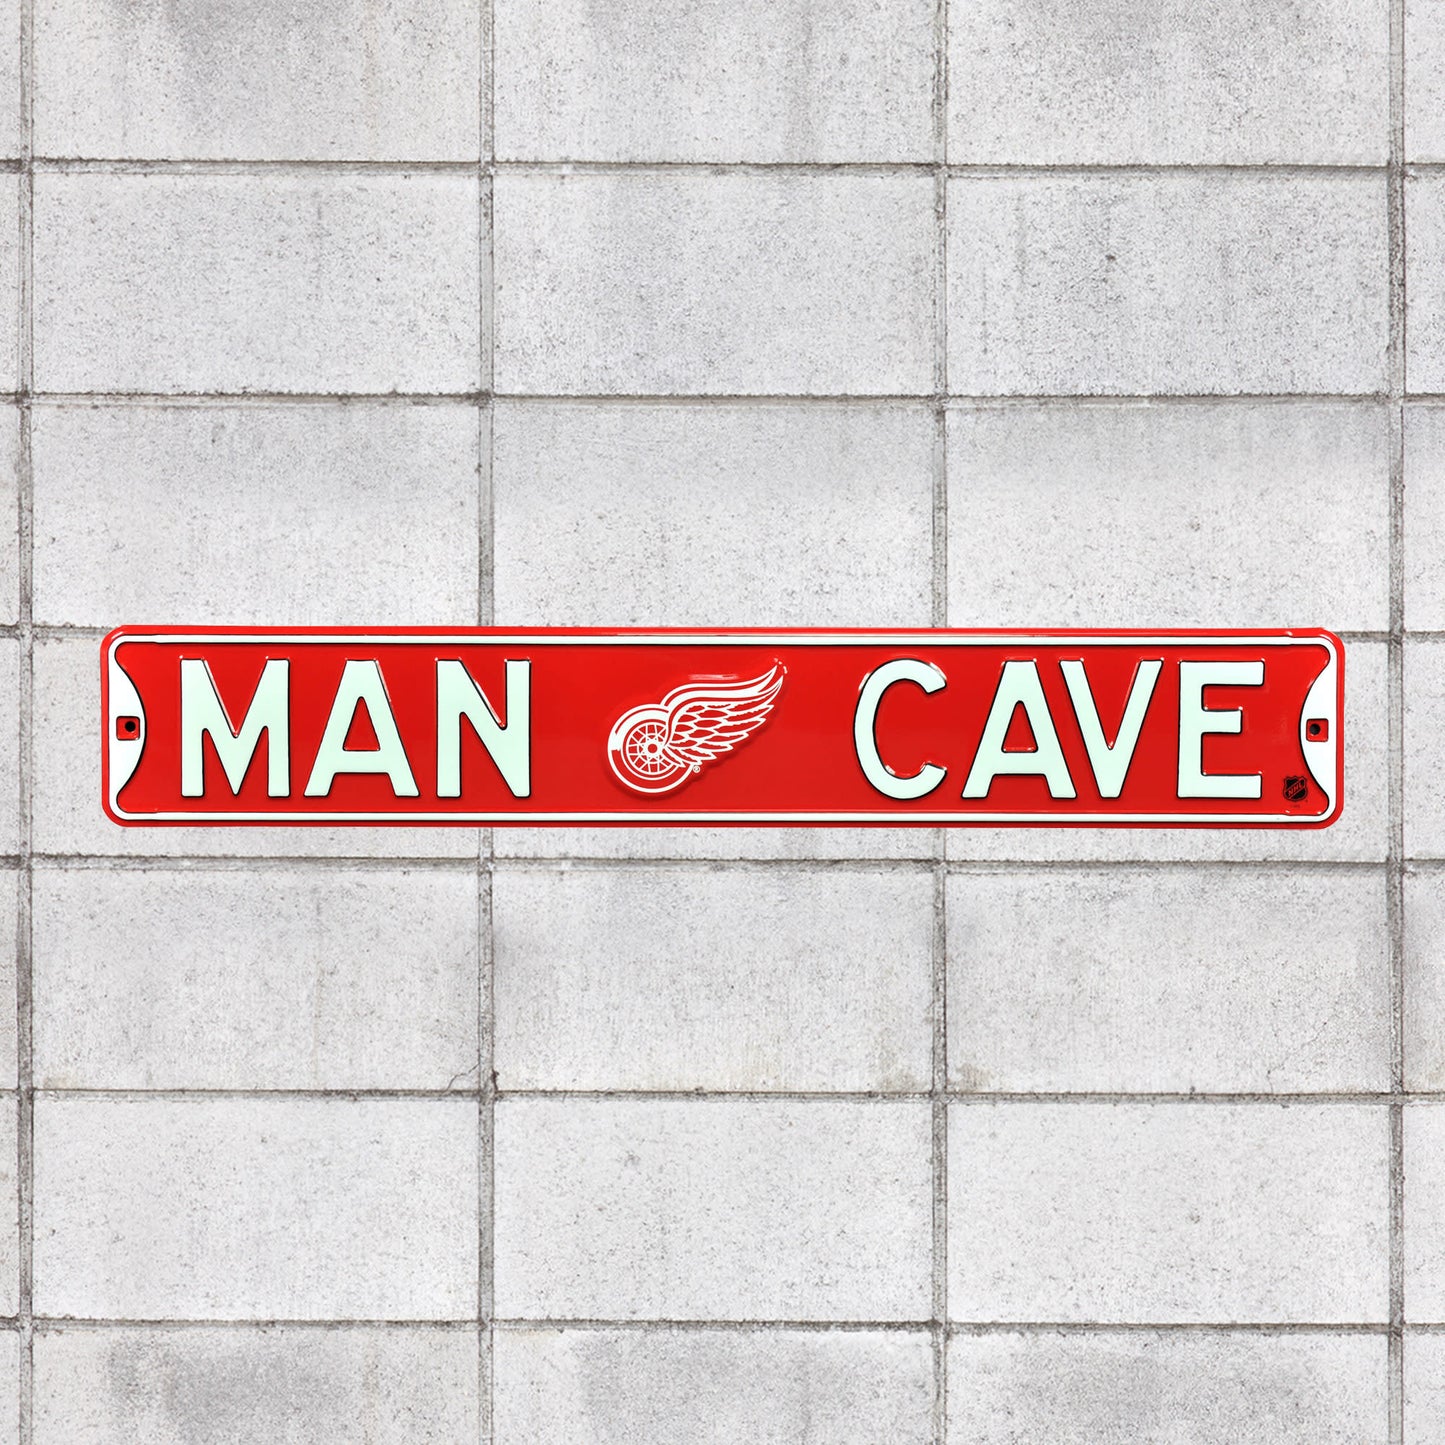 Detroit Red Wings: Man Cave - Officially Licensed NHL Metal Street Sign